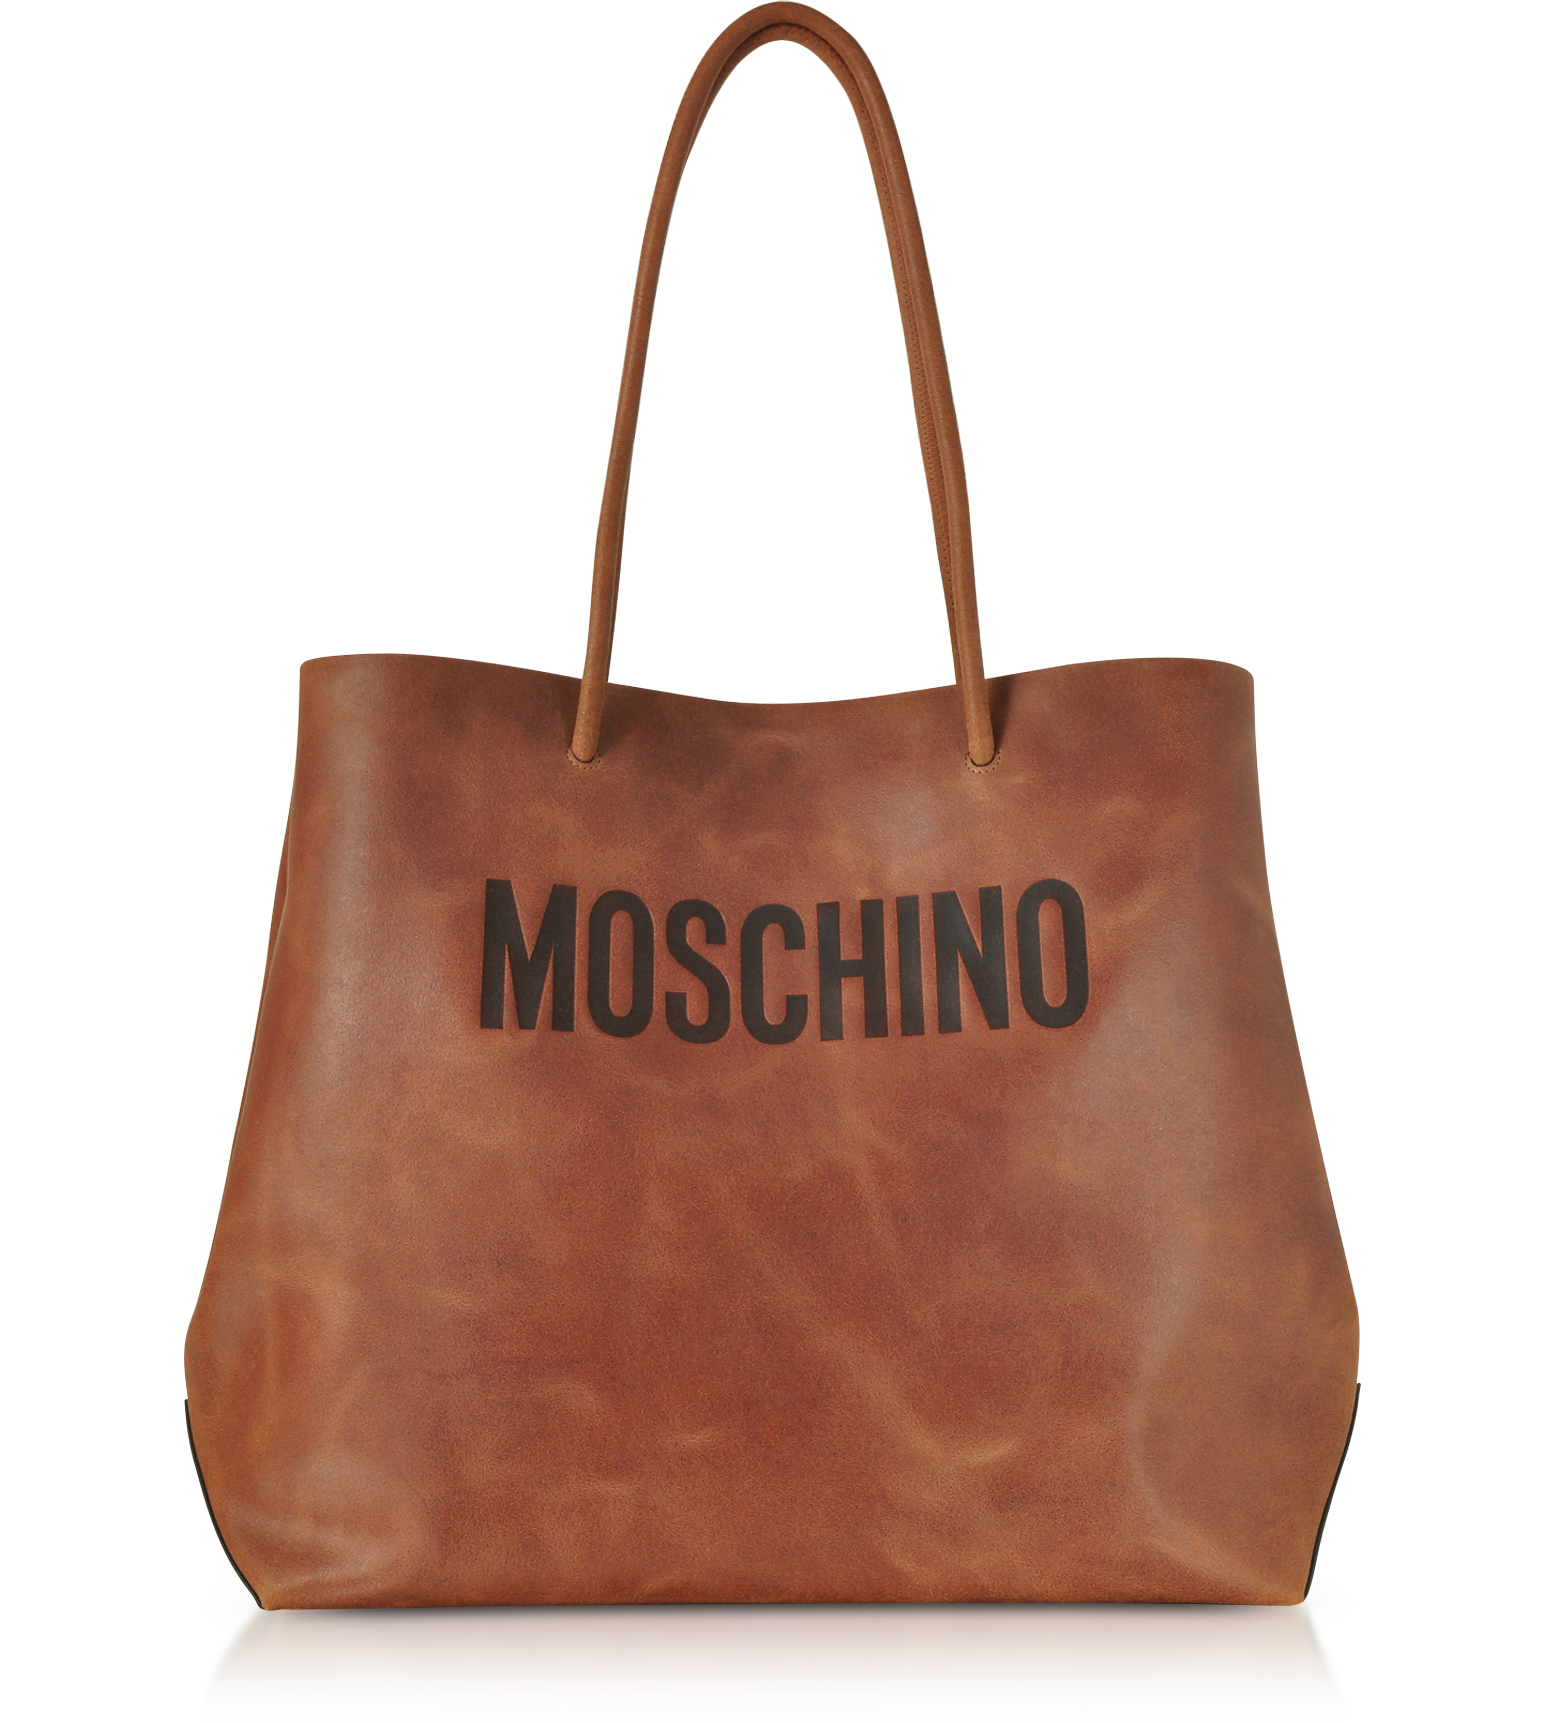 Moschino Brown Leather Tote Bag w 